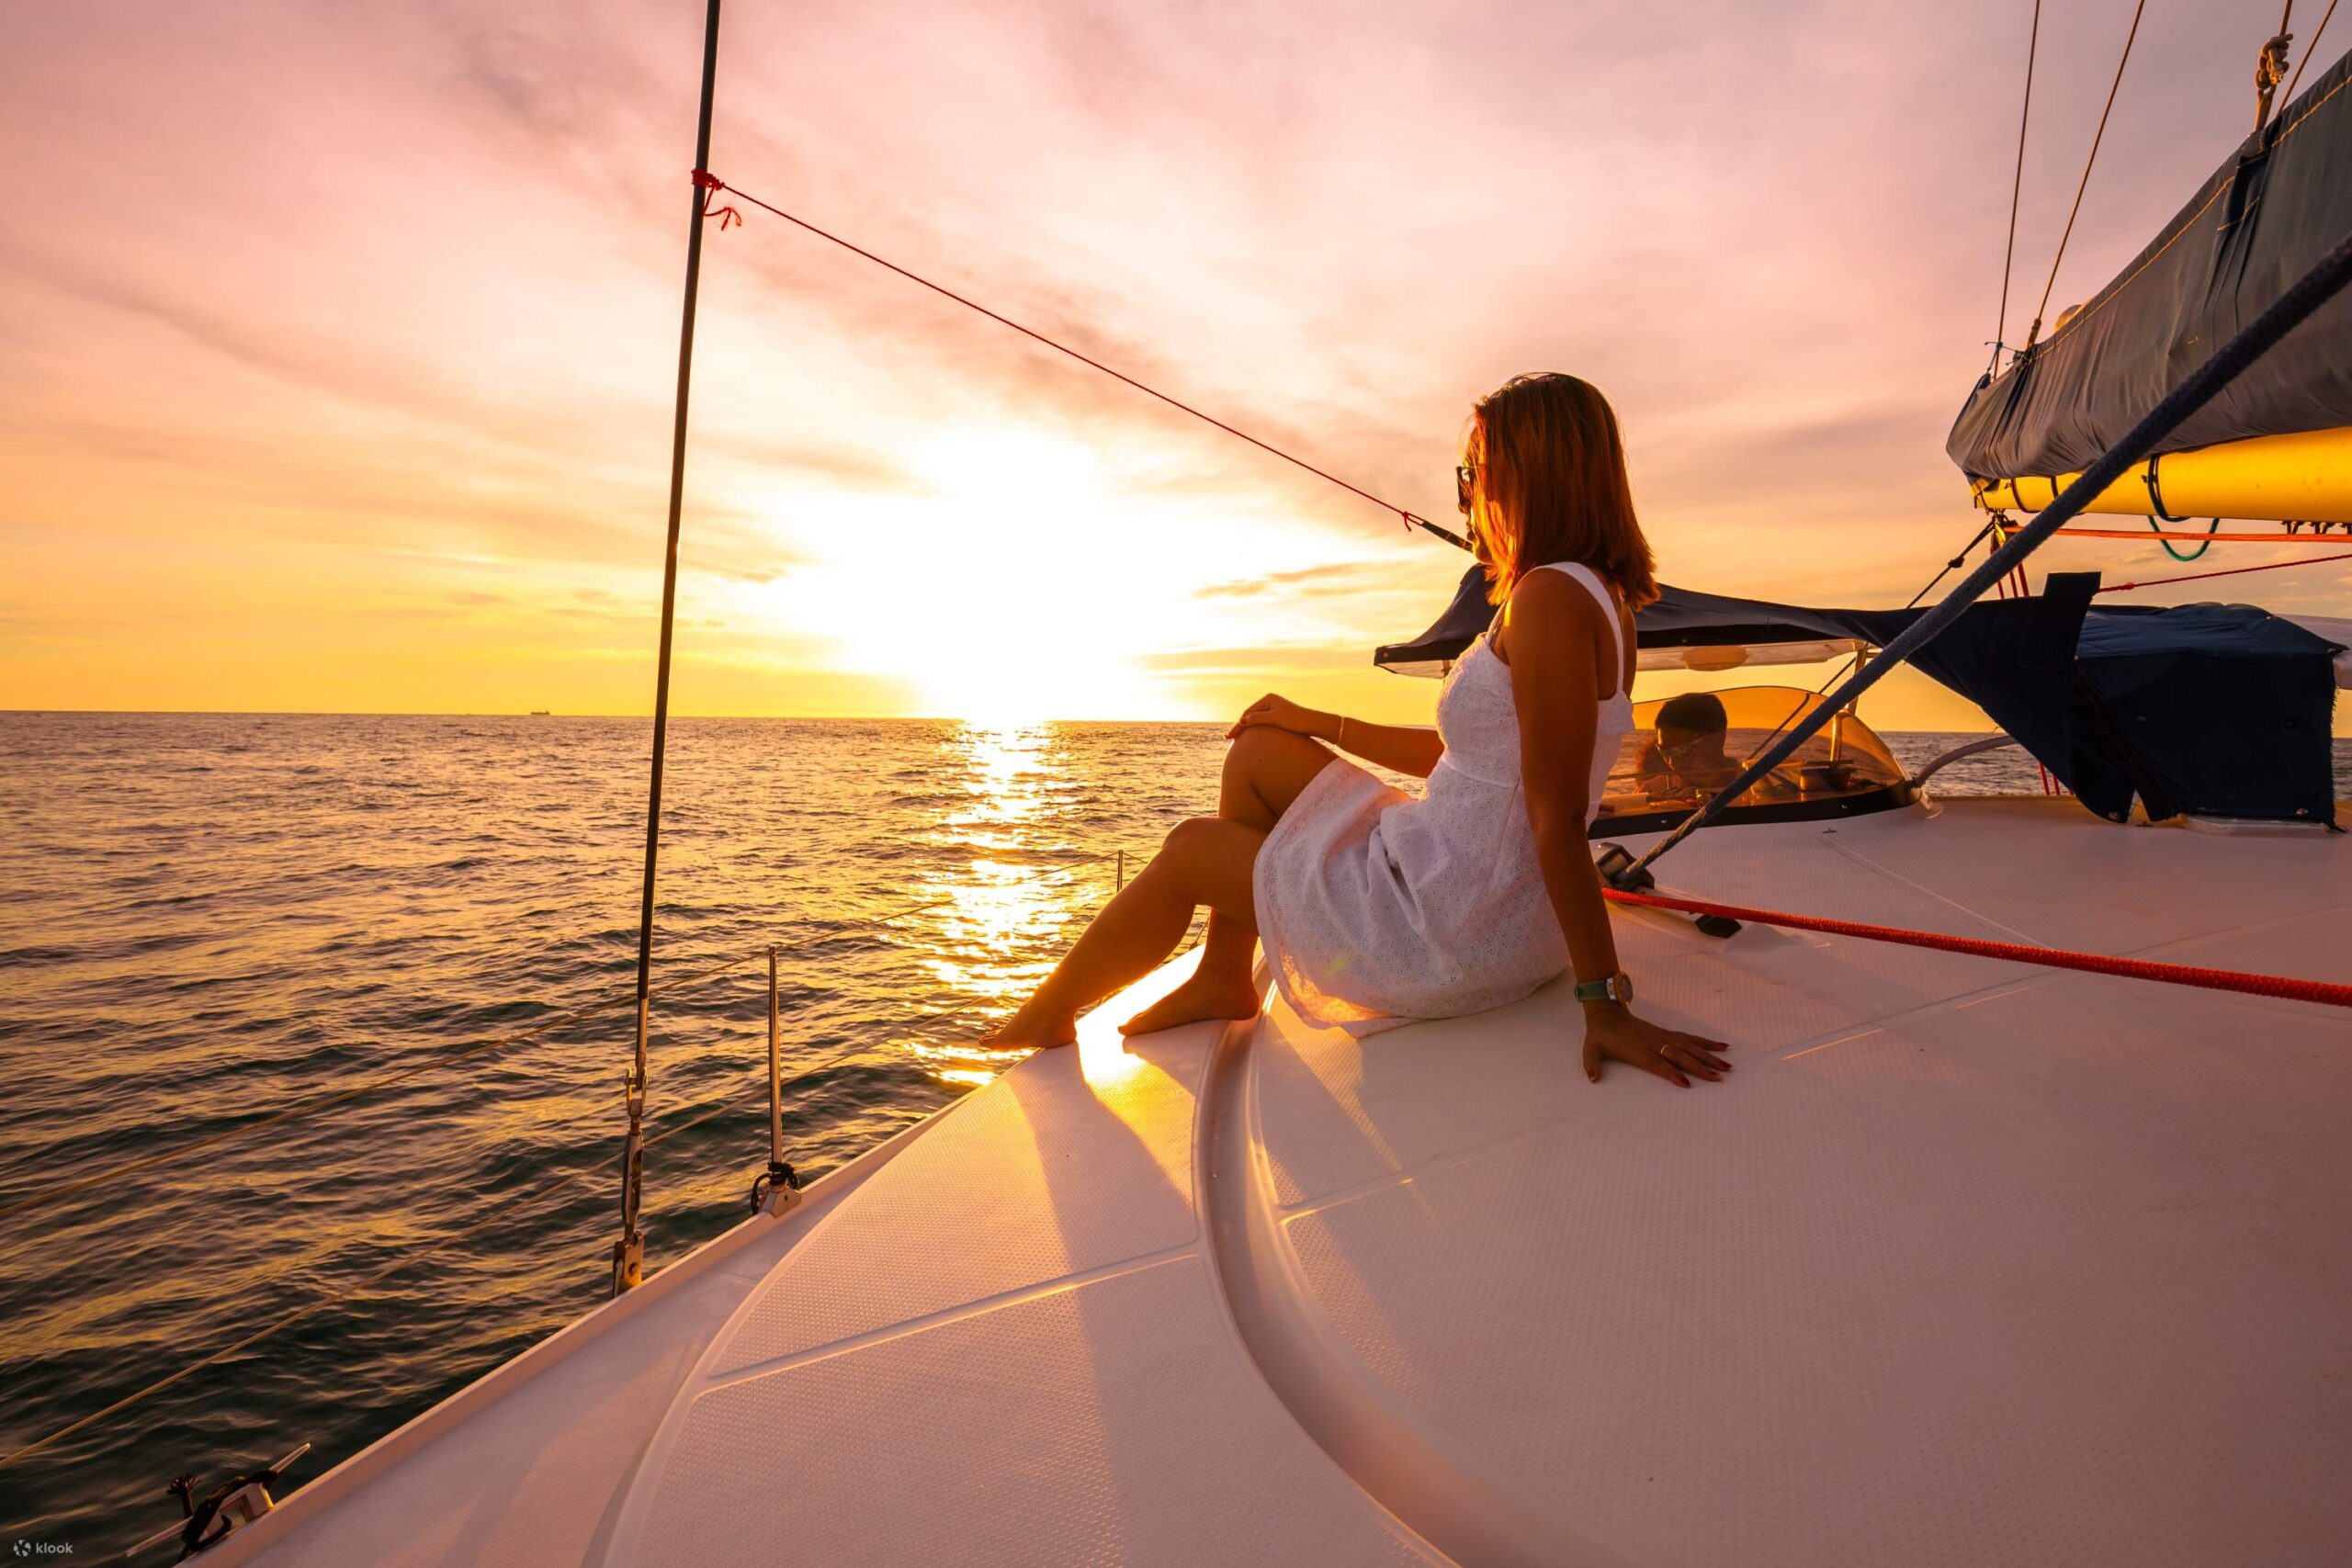 Romantic evening on a sailing boat in Barcelona. Sunset Sailing Cruise in Barcelona